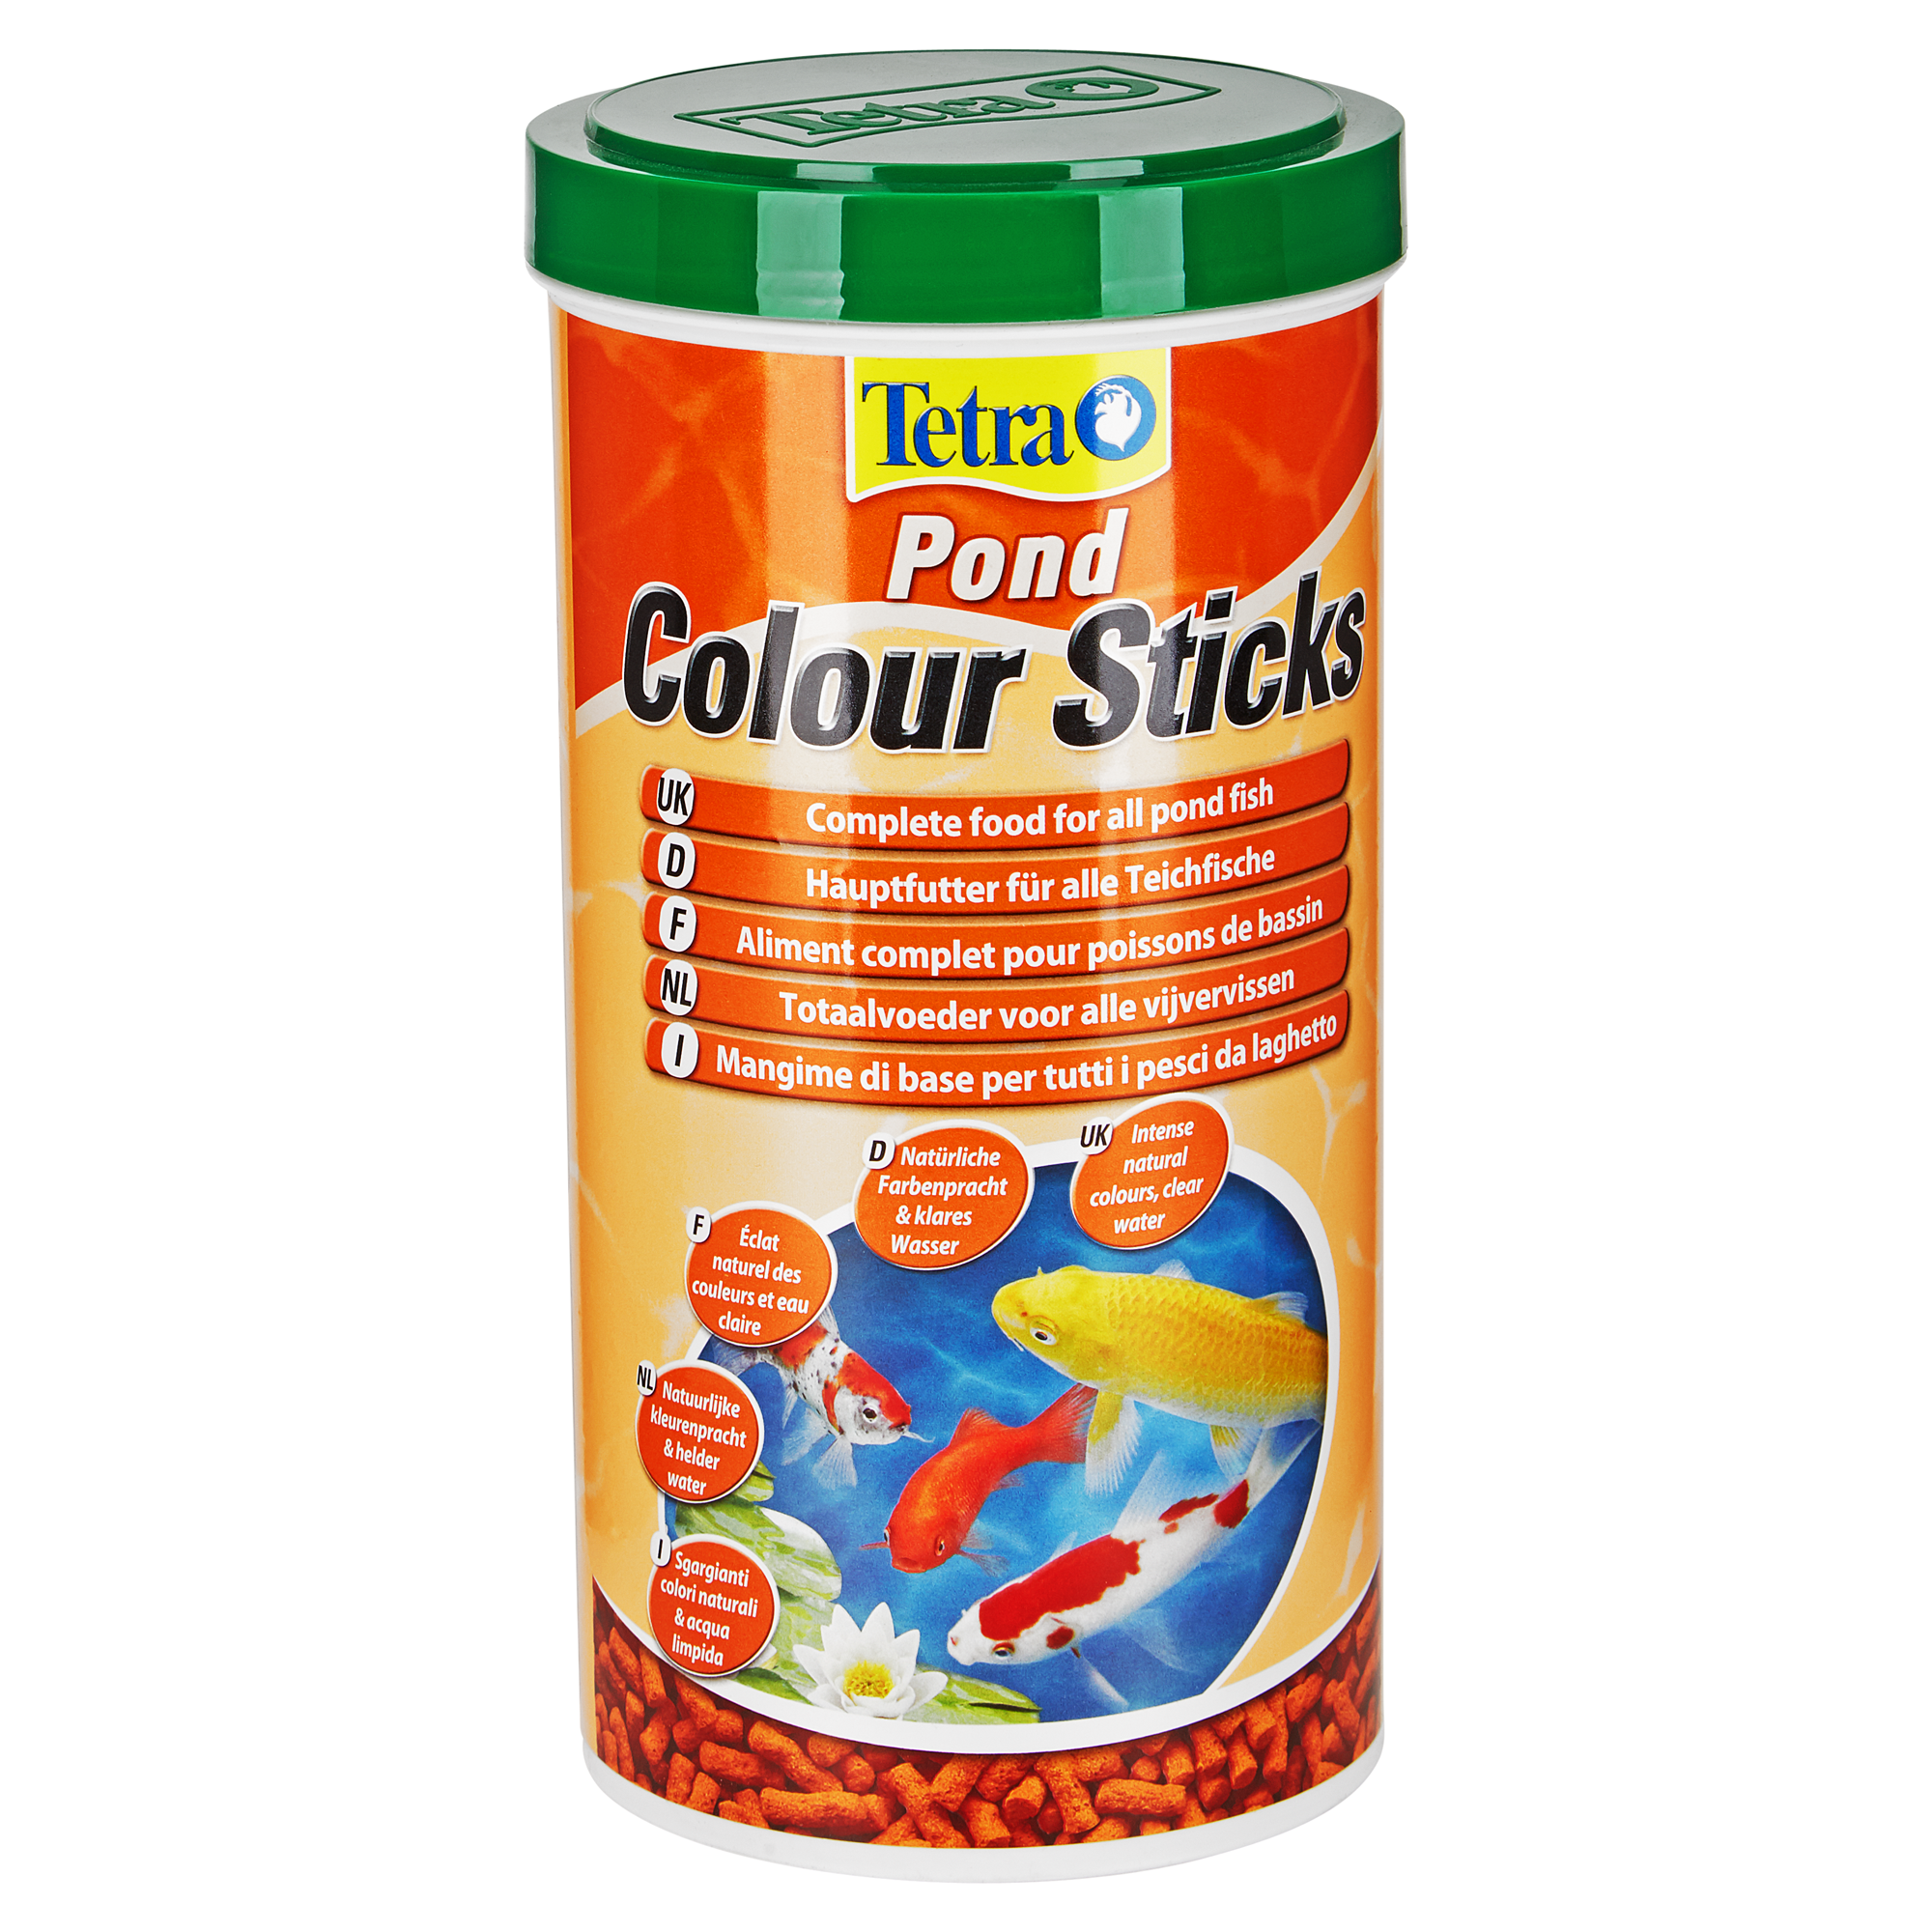 Fischfutter "Pond" Colour Sticks 220 g + product picture